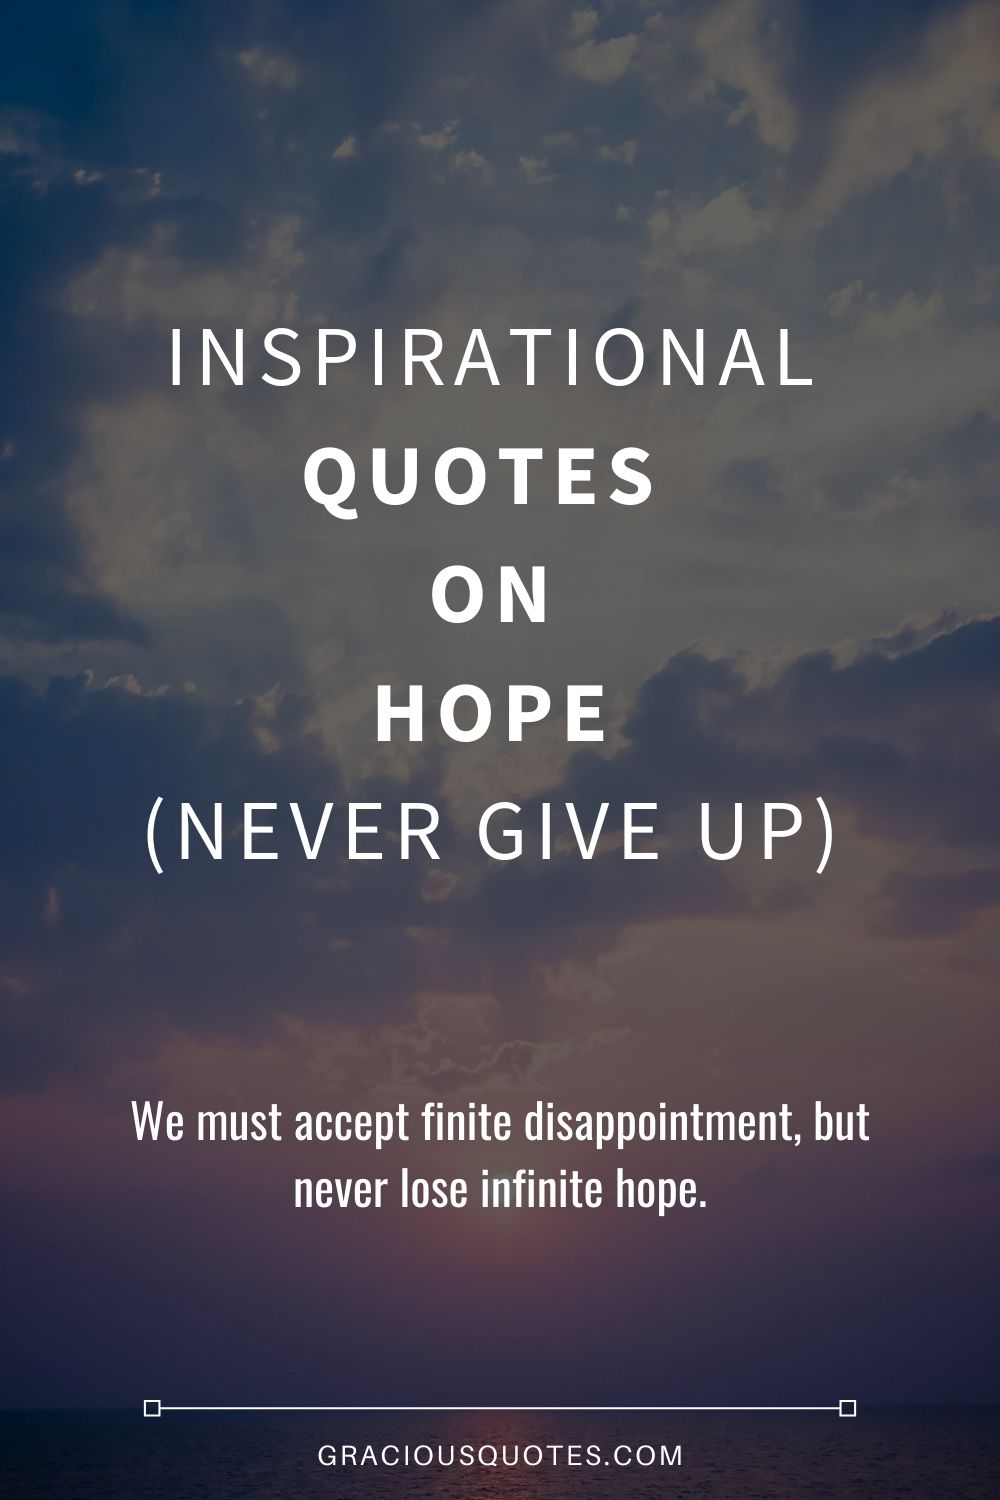 58 Inspirational Quotes on Hope (NEVER GIVE UP)